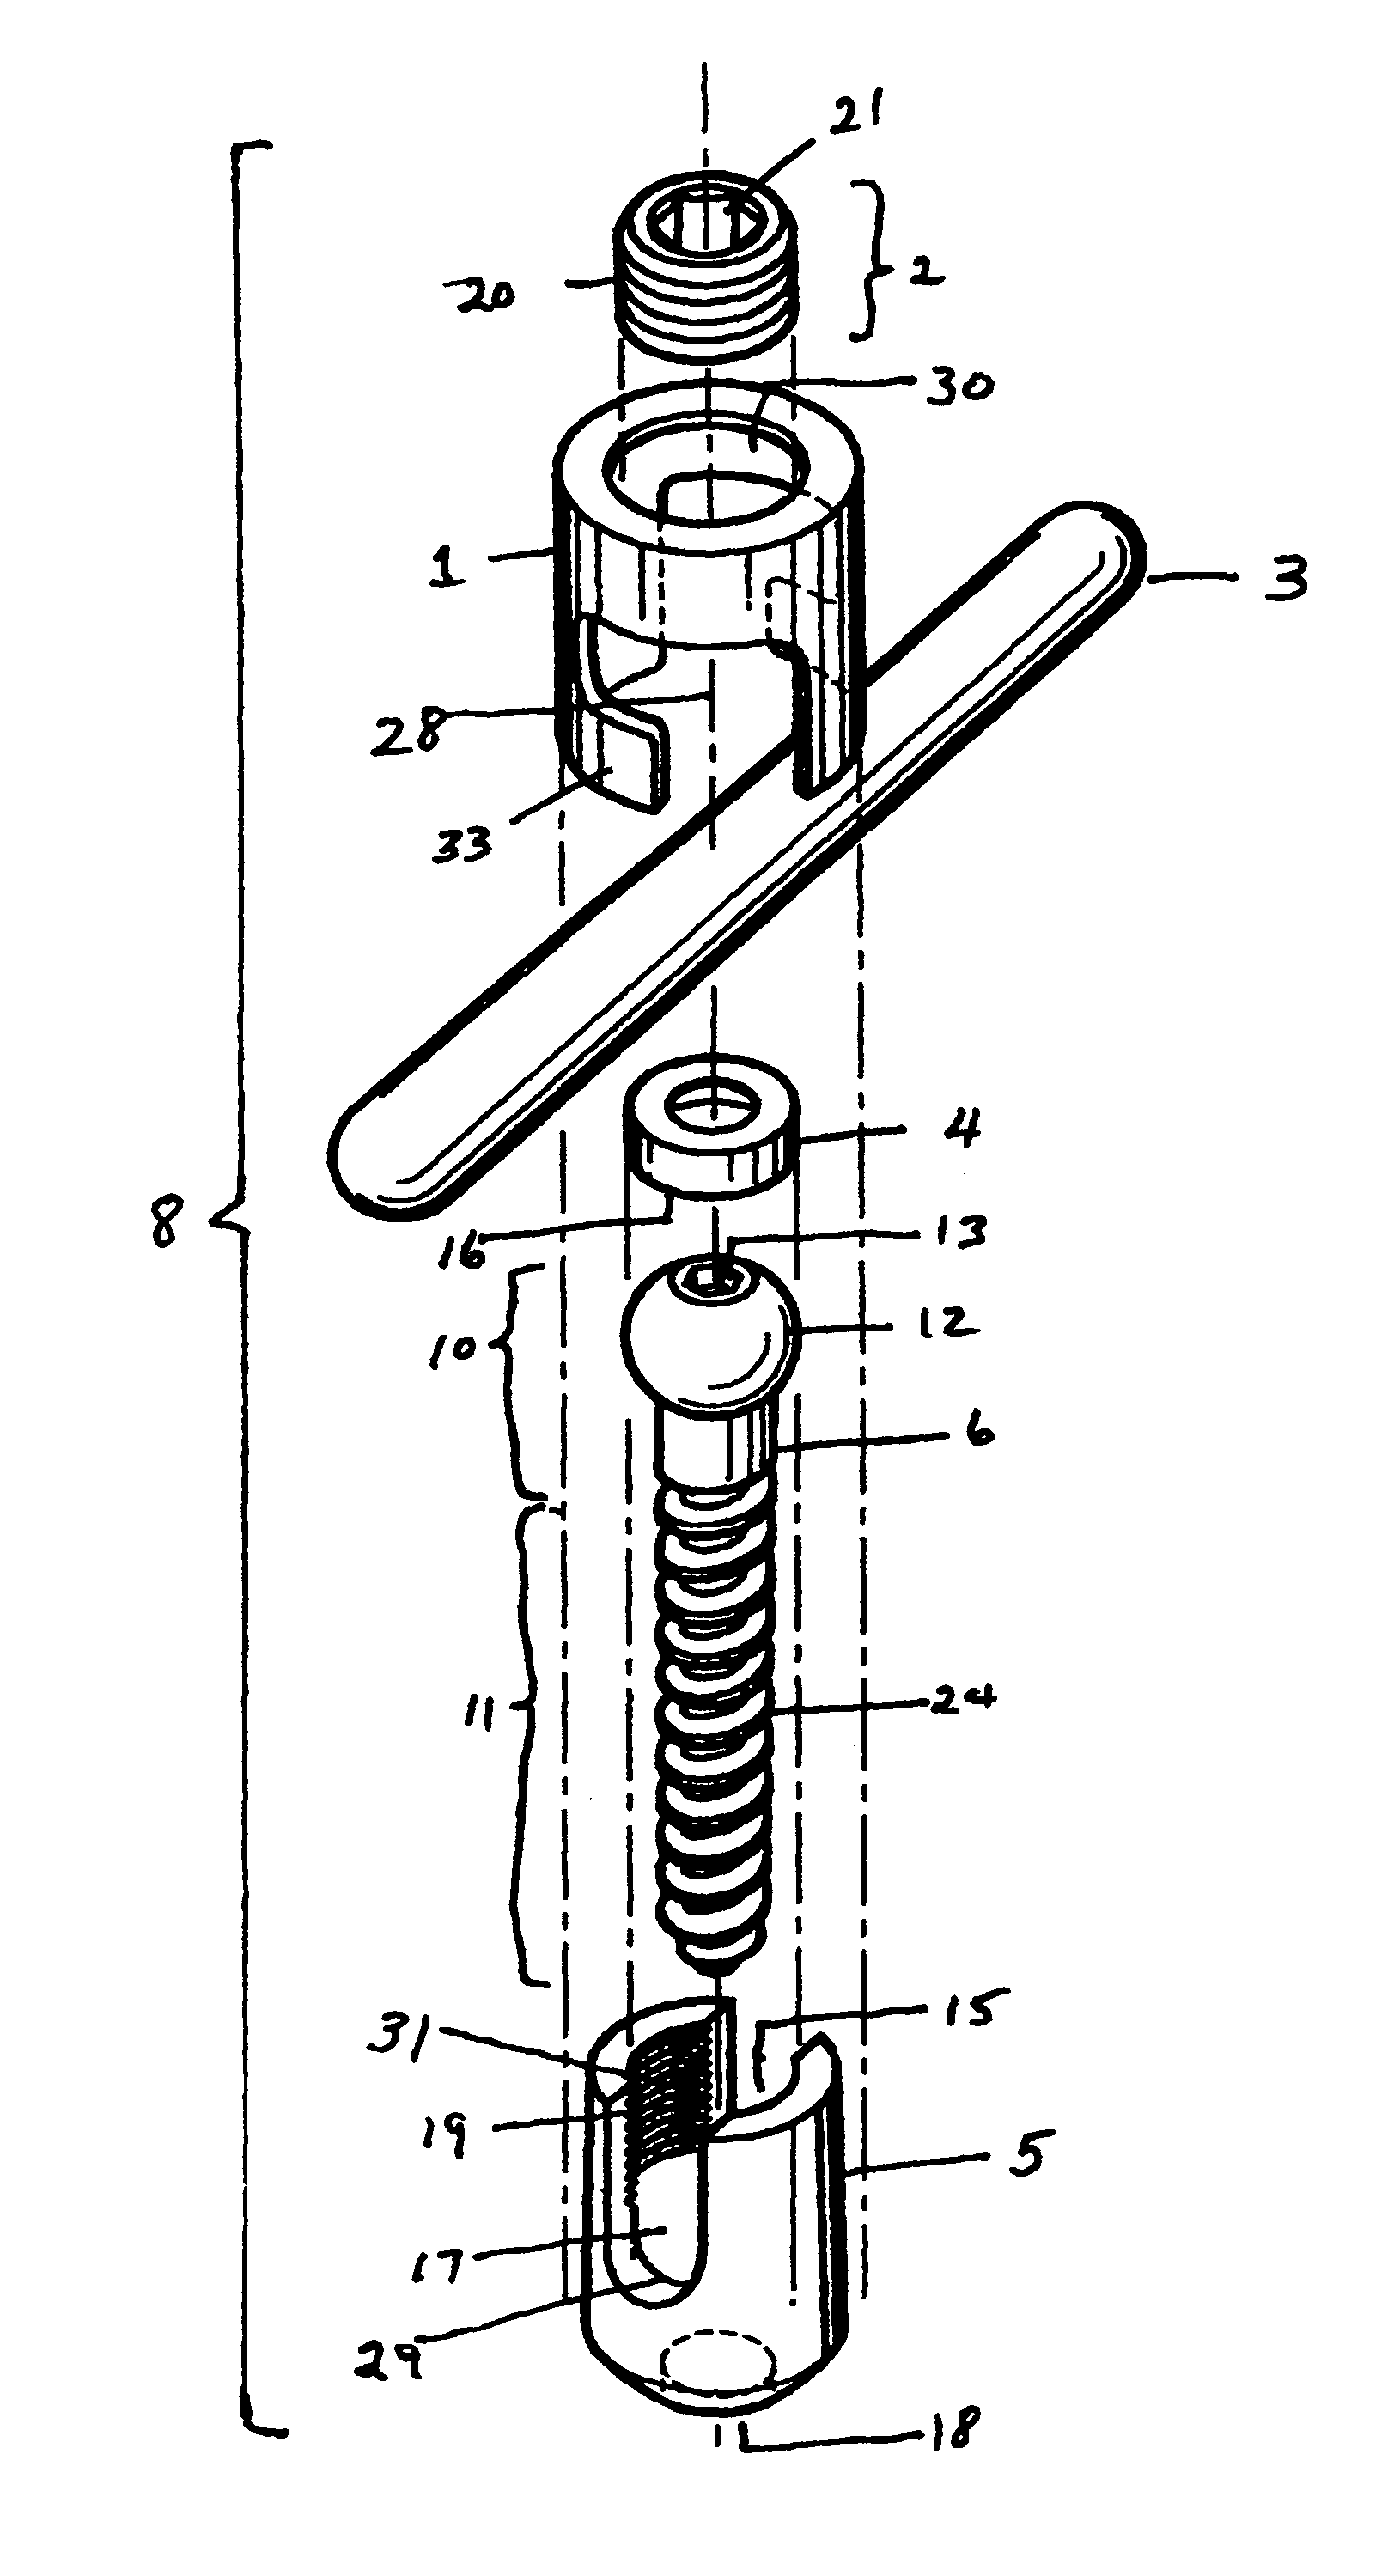 Device for securing spinal rods